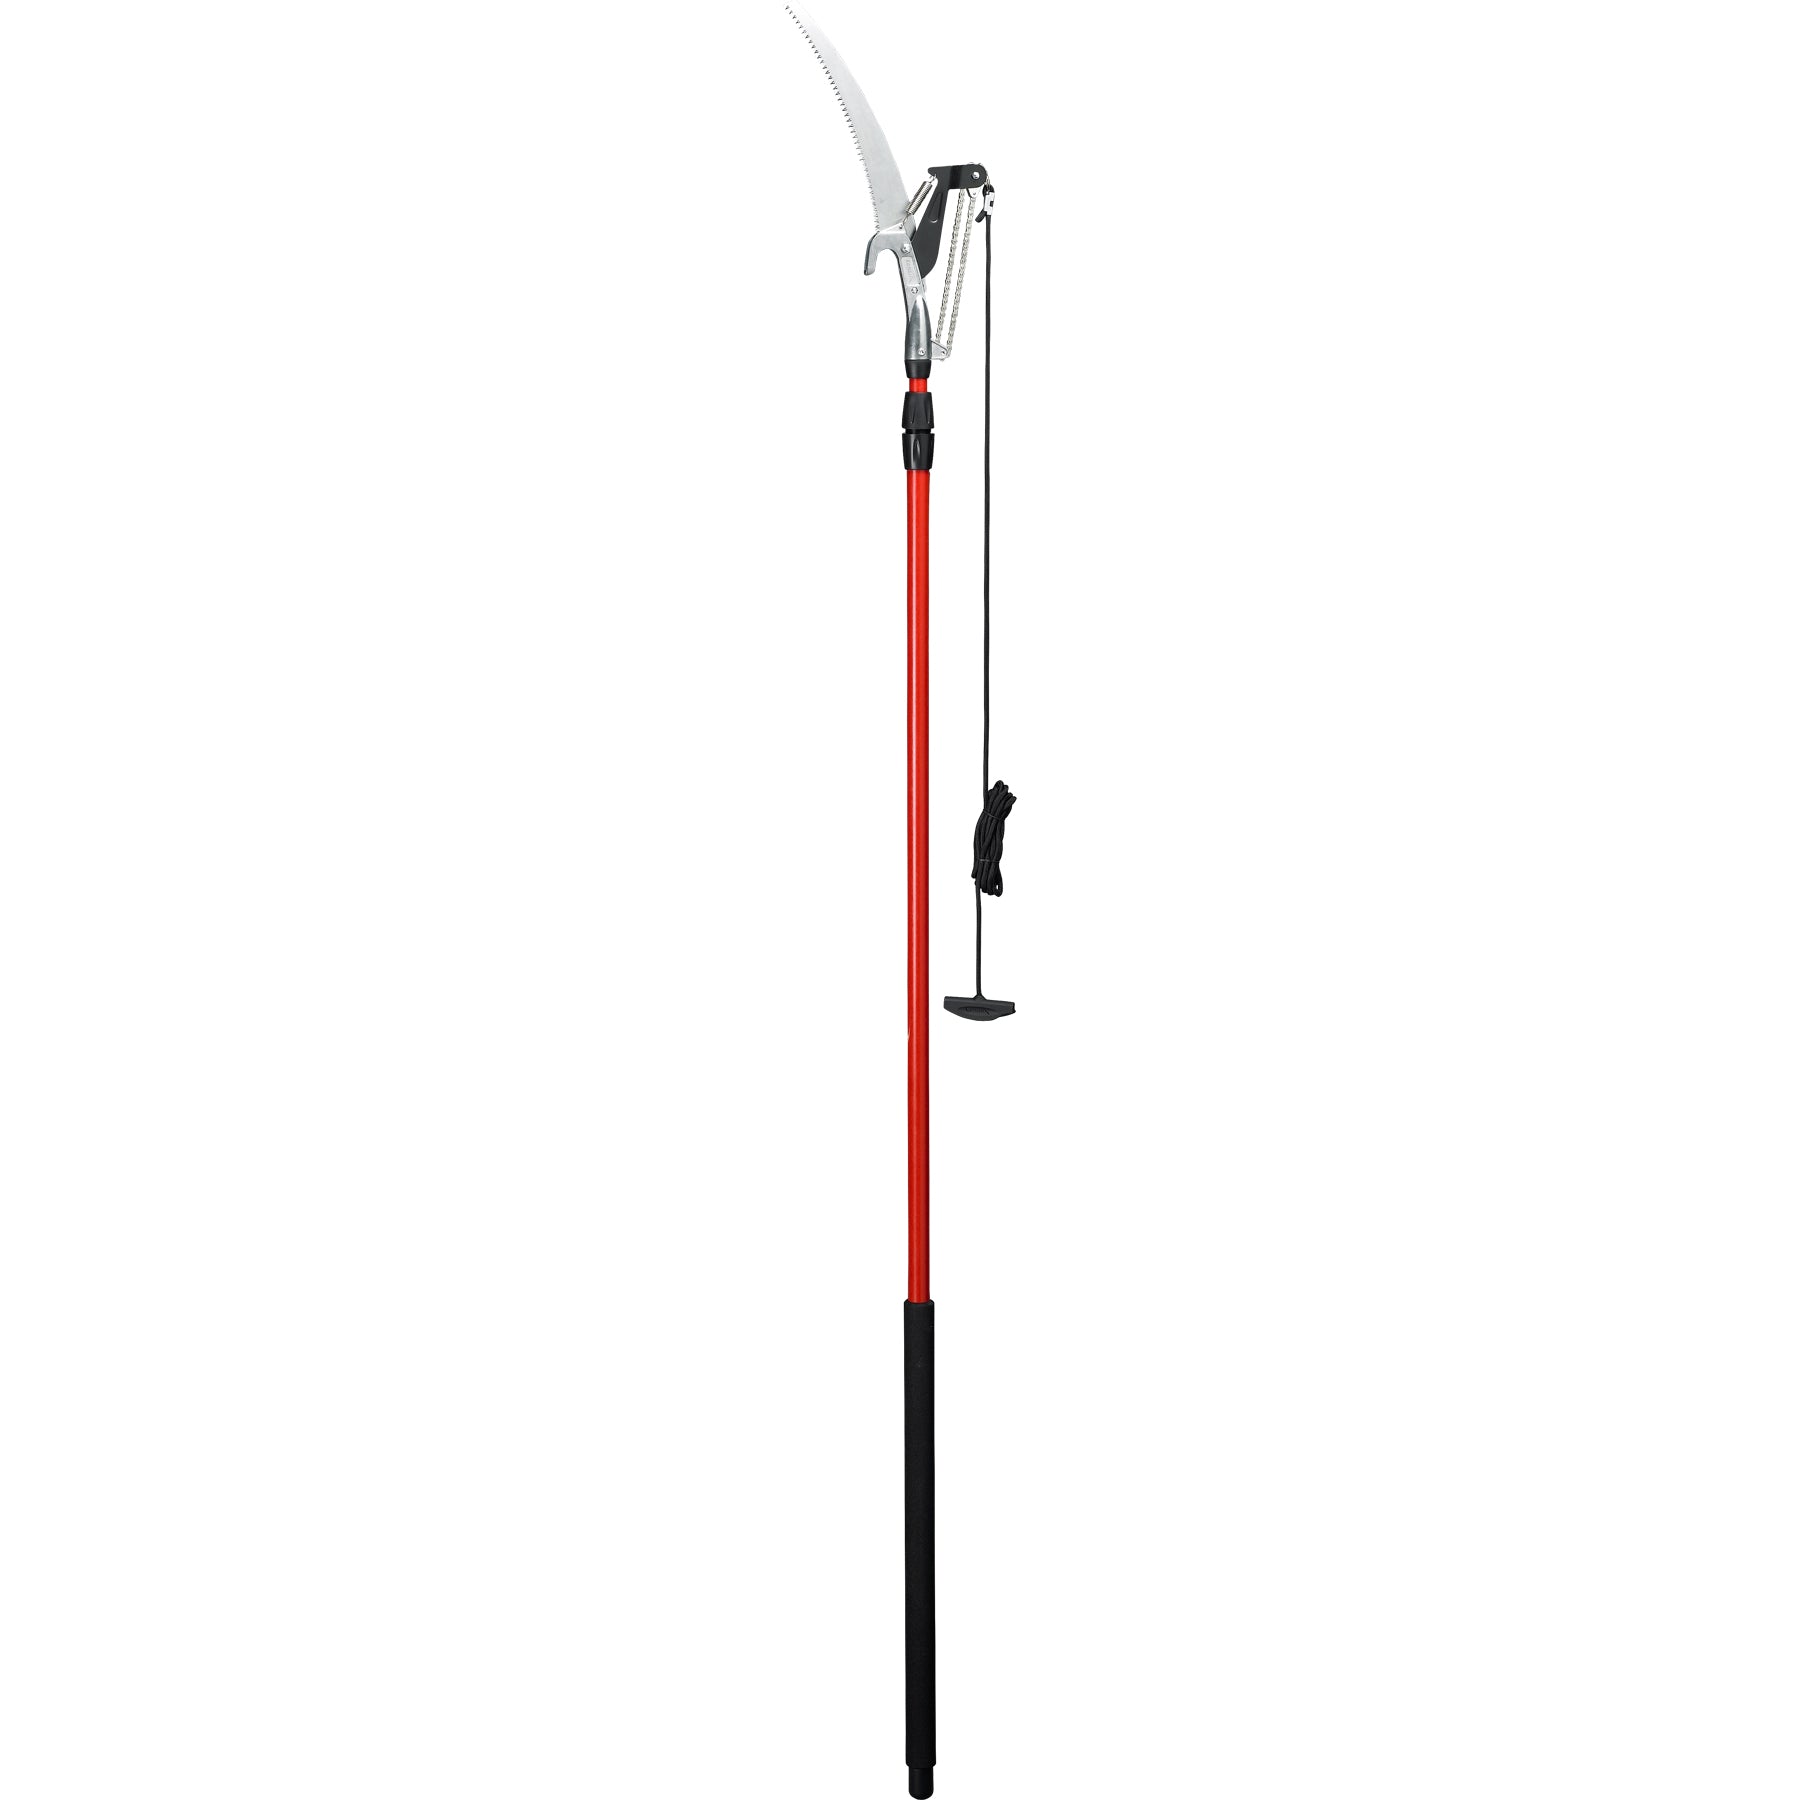 Dual Compound-Action Tree Pruner, 14 ft.